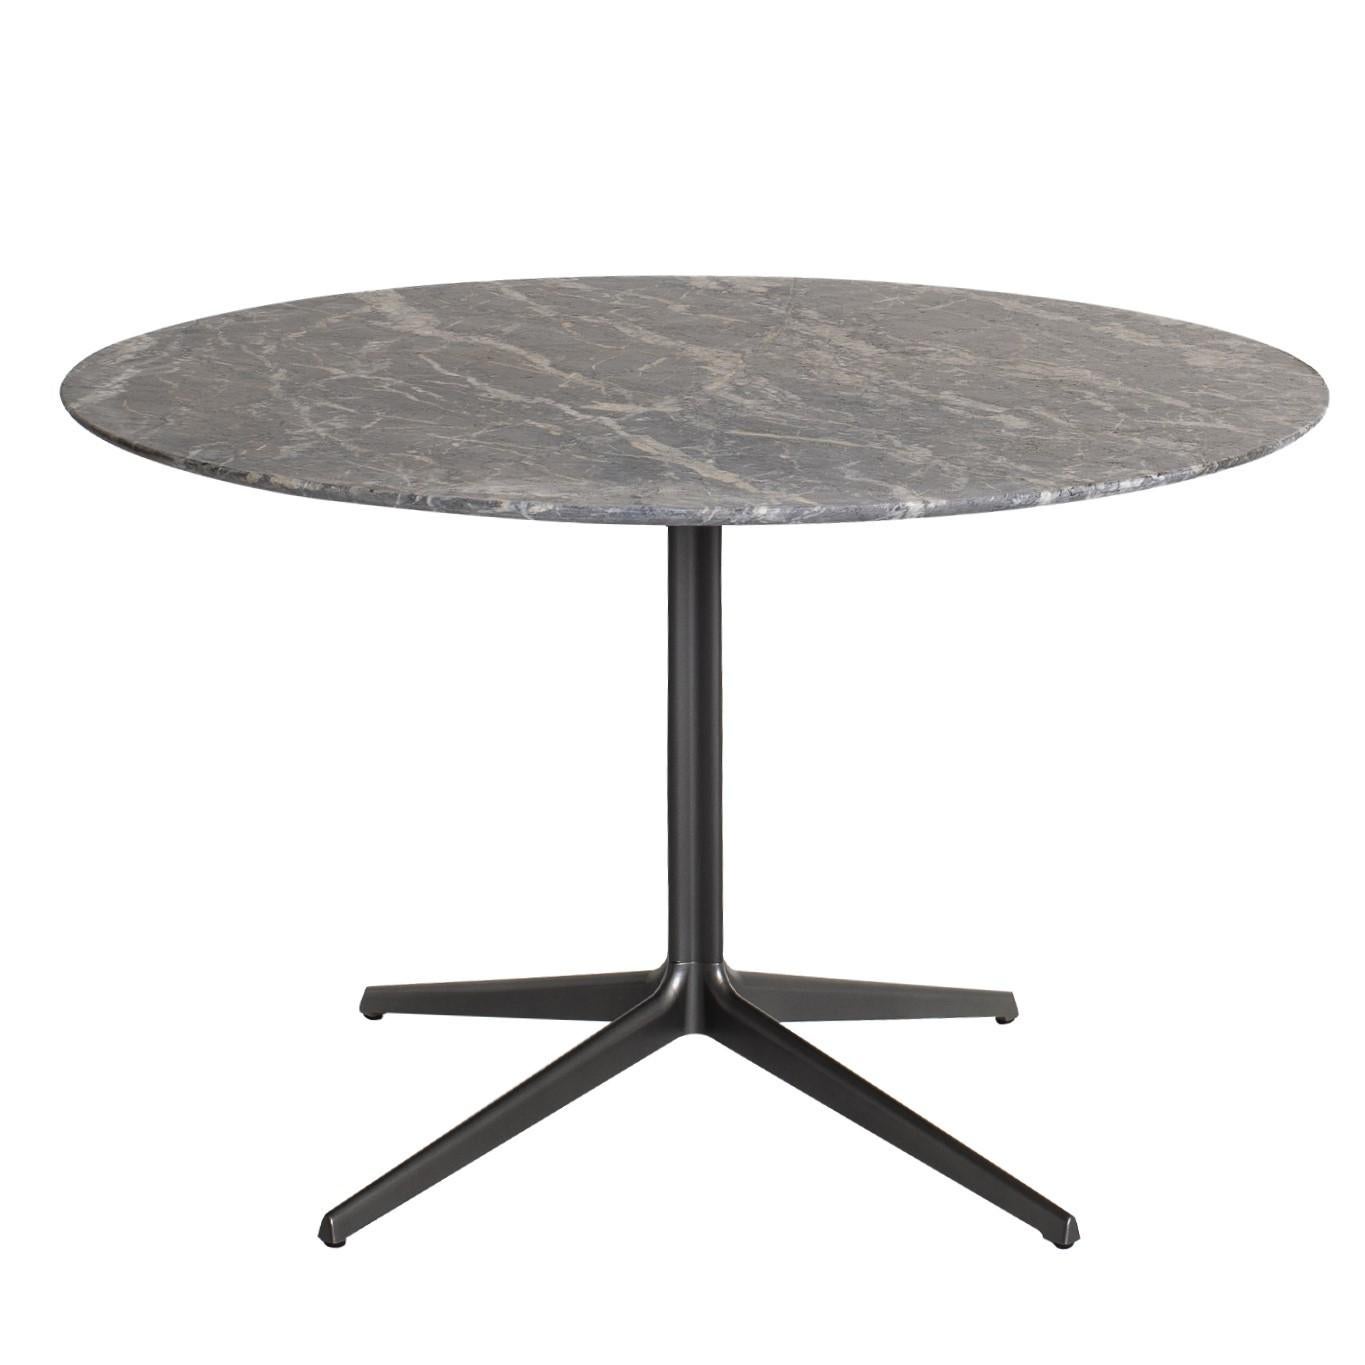 The 100% Italian Bistrot collection is dedicated to dining tables with a metal base suitable for public spaces thanks to the wide choice of top sizes available in marble, crystal, wood or leather. In particular, this stylish round table comes in a